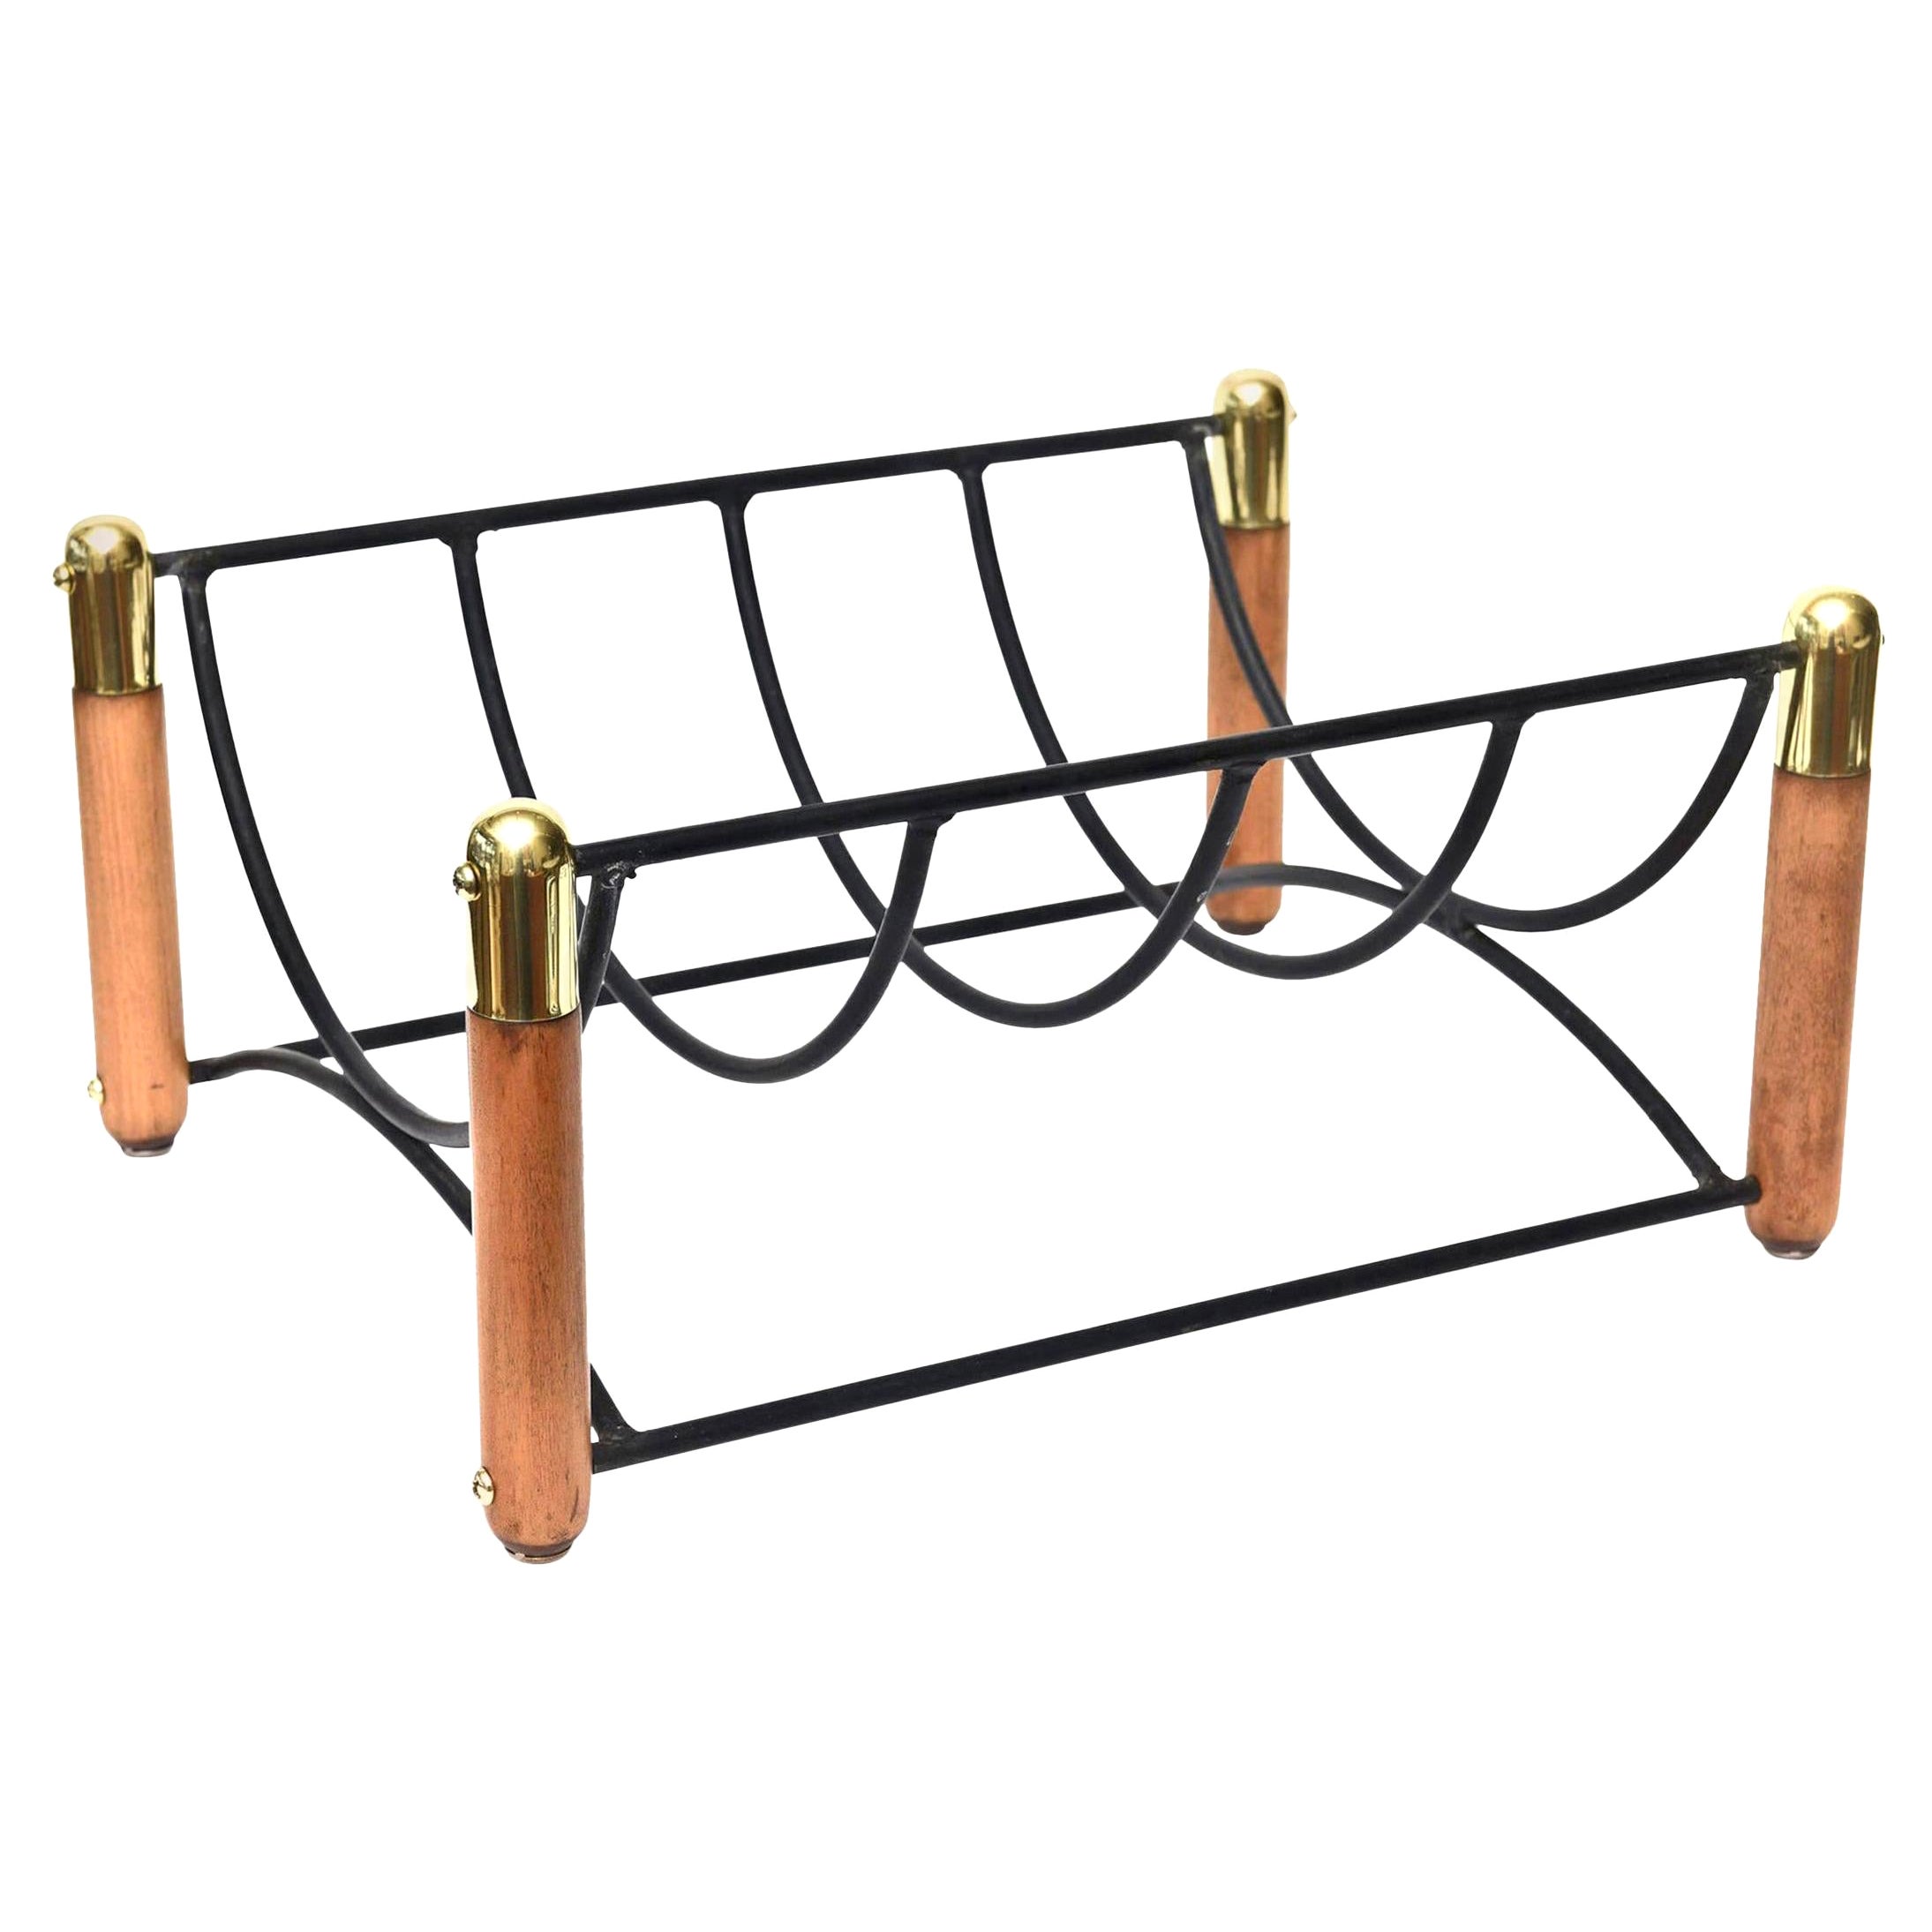 Wood, Iron and Brass Magazine Stand or Fireplace Log Rack Mid-Century Modern